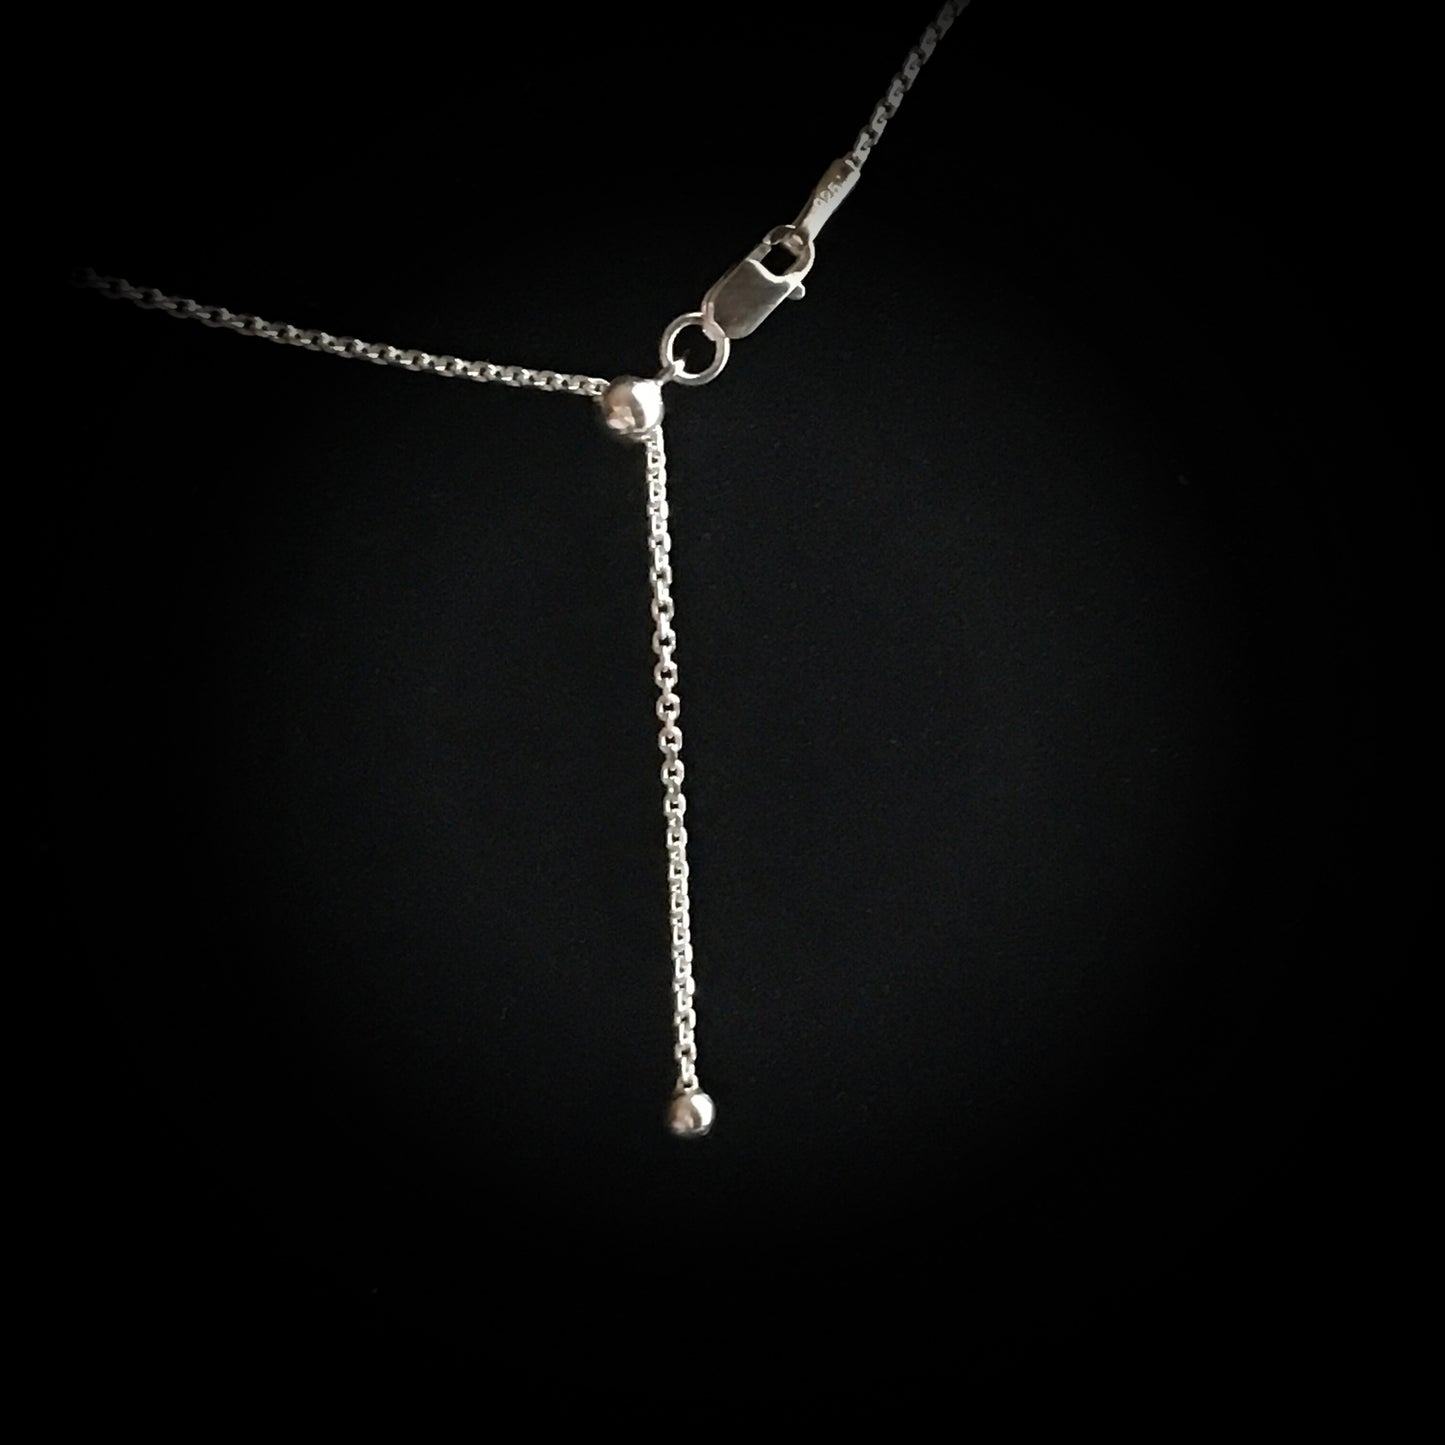 Adjustable Sterling Silver Chain